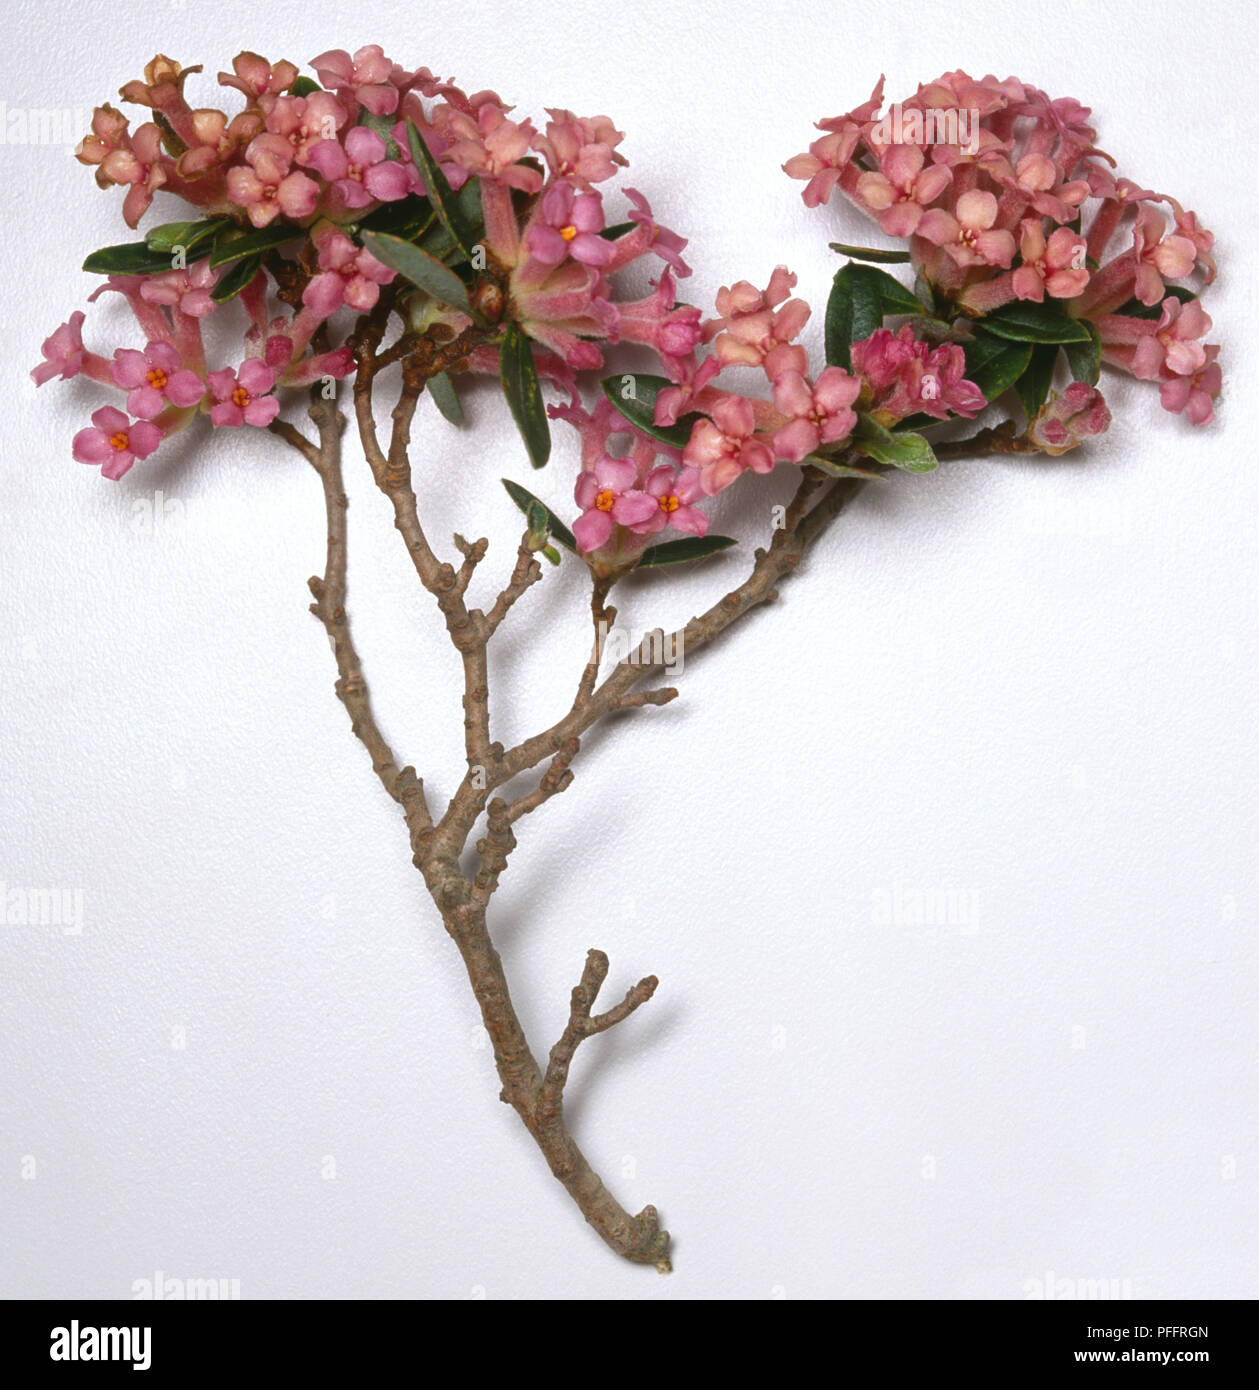 Daphne Sericea, woody branching stem with clusters of pink flowers. Stock Photo